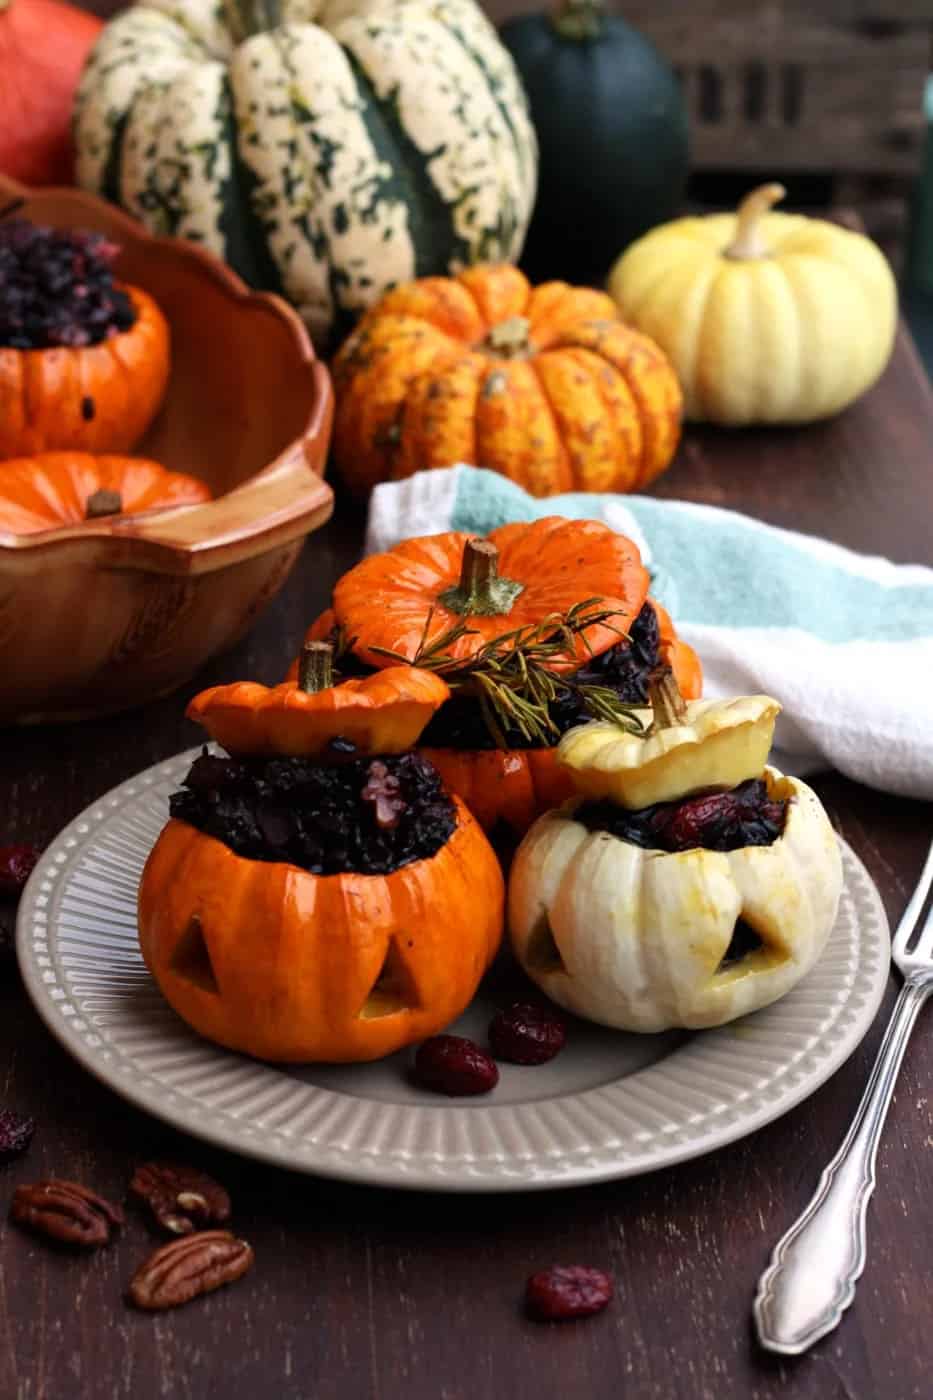 Stuffed Halloween pumpkins with wild rice, on a white plate.